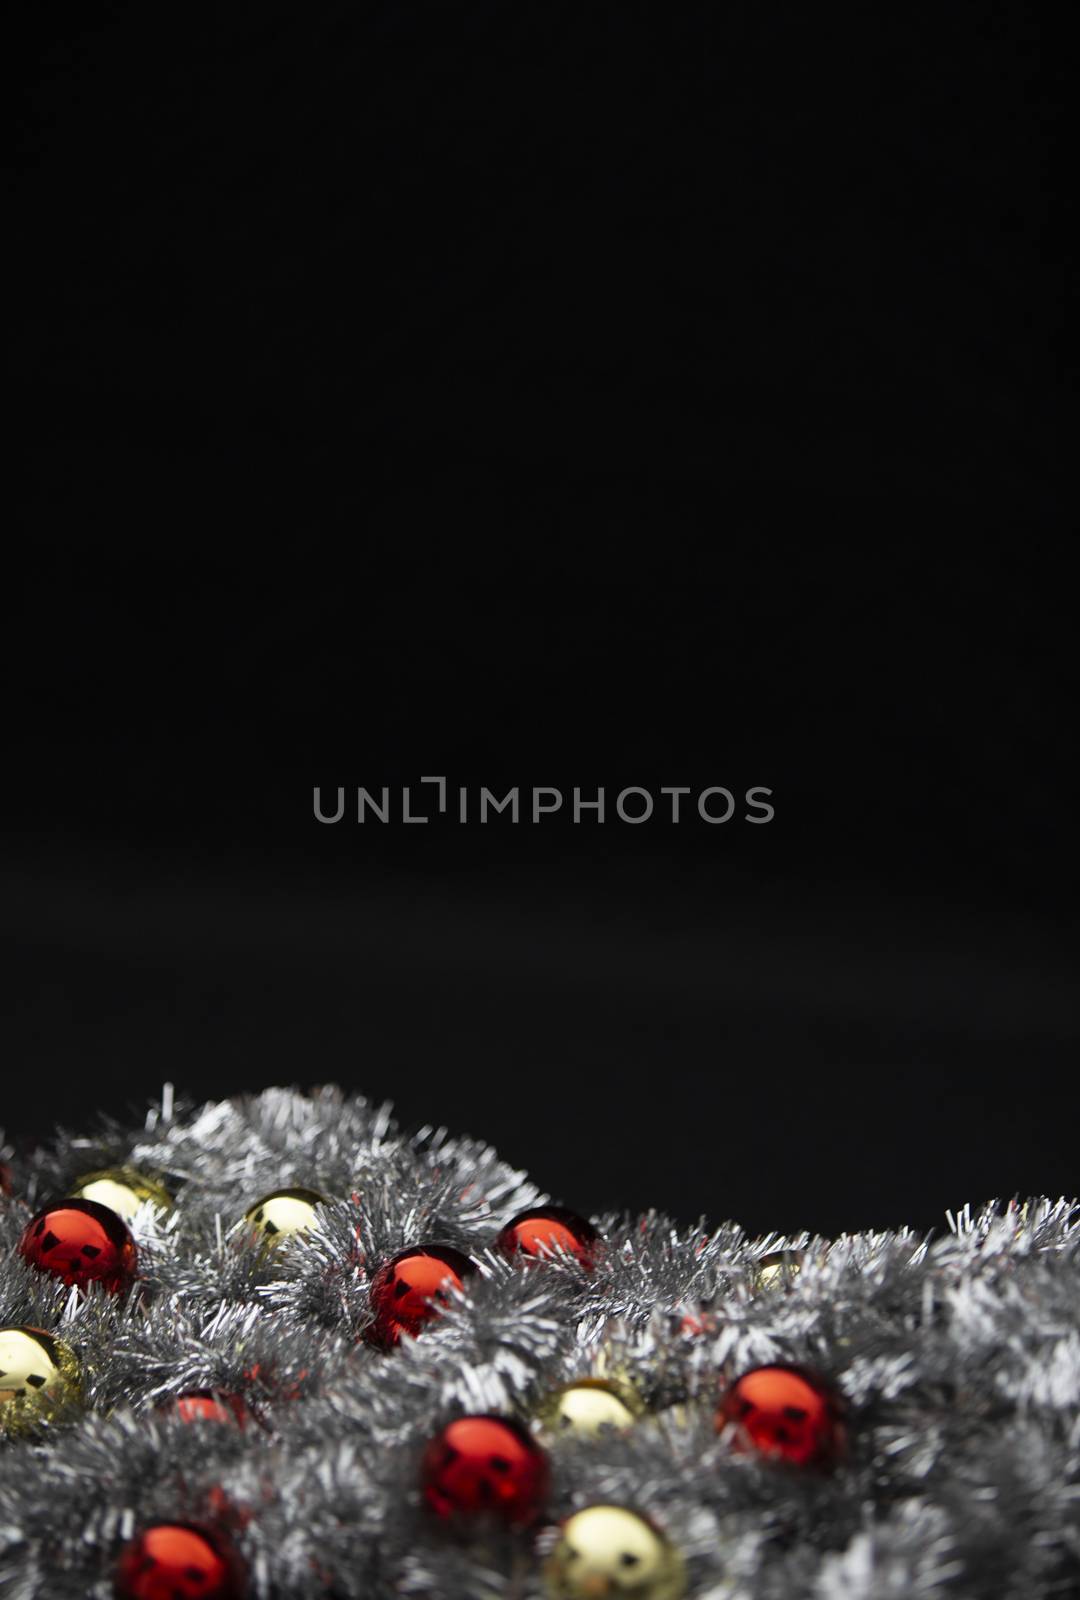 Christmas vertical copy space with red and golden bright baubles in silver decorative chain garland on black background with bokeh effect